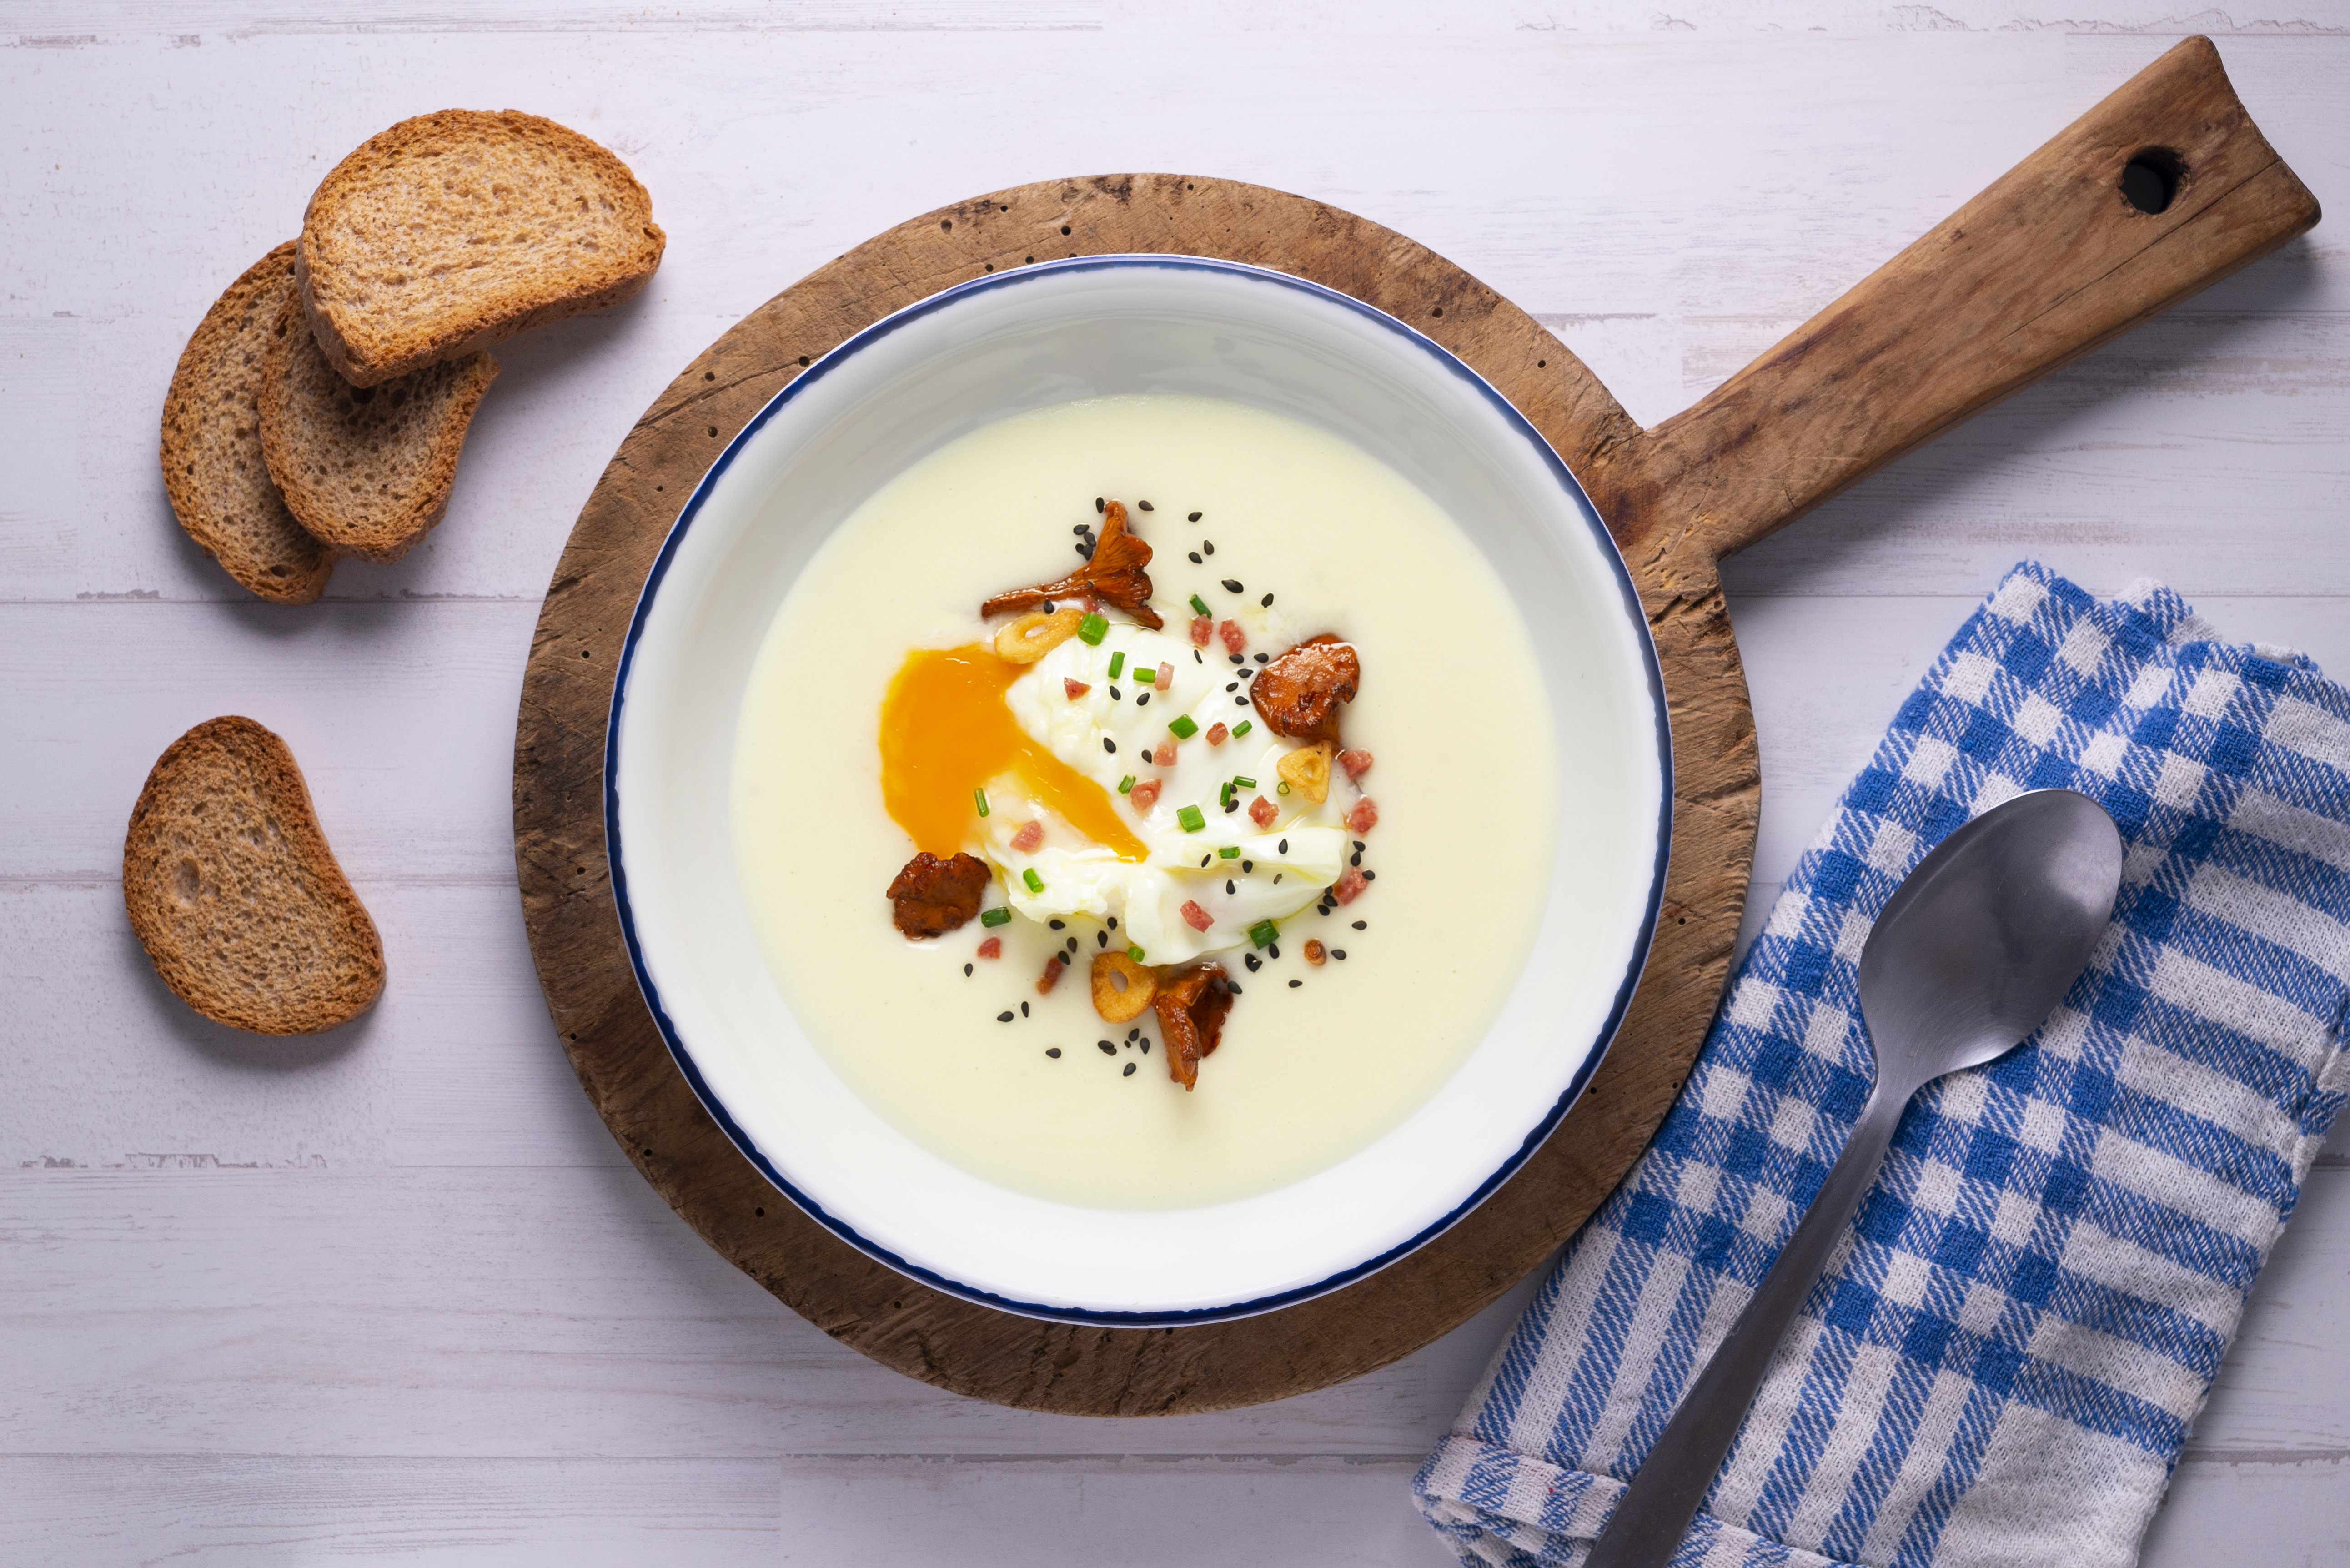 Cream of potatoes with poached egg and mushrooms